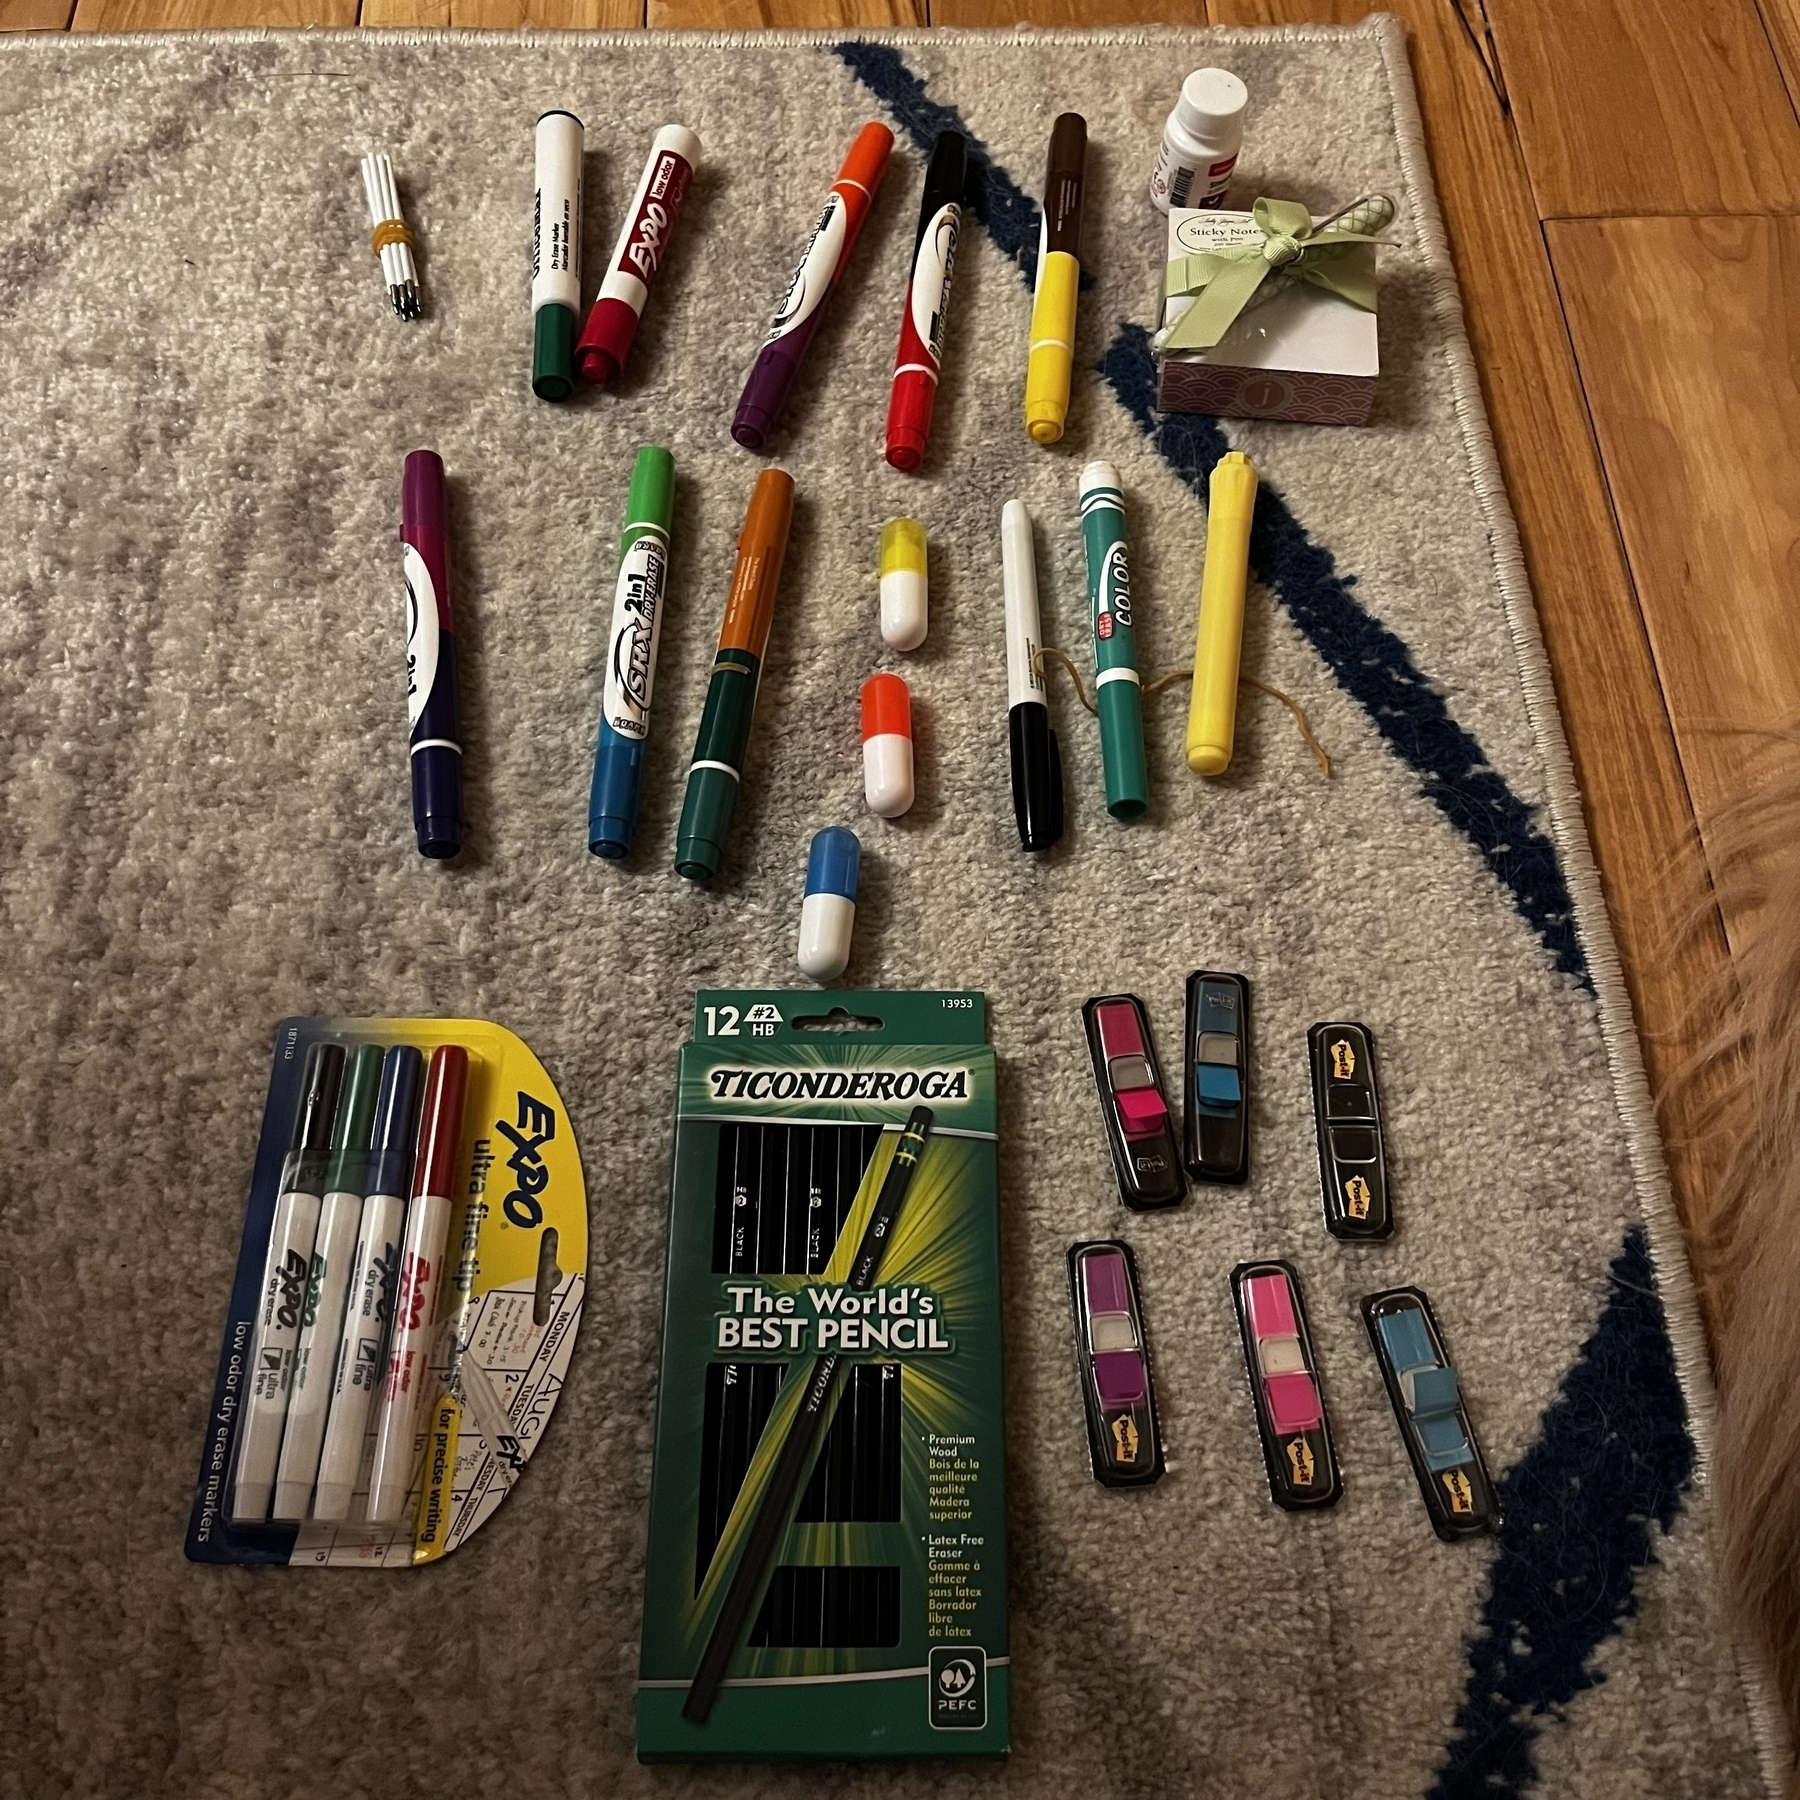 Markers, paper, pencils, and bookmarks arranged on the floor.